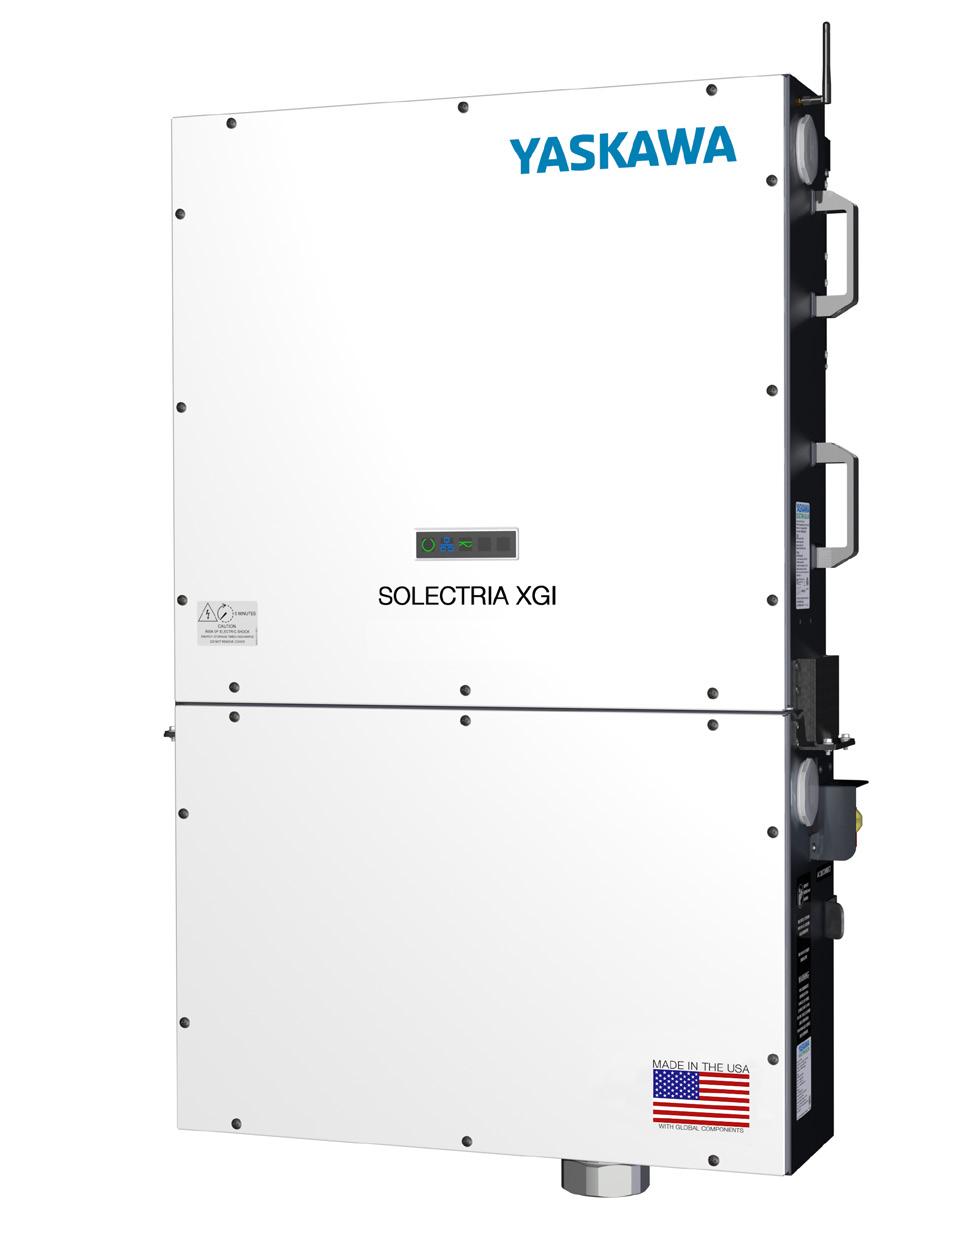 Buffalo Grove, IL Same Quality, Two Markets 1000VDC inverter for the commercial PV market and 1500VDC inverter for the utility-scale PV market Lowering Costs for System Owners